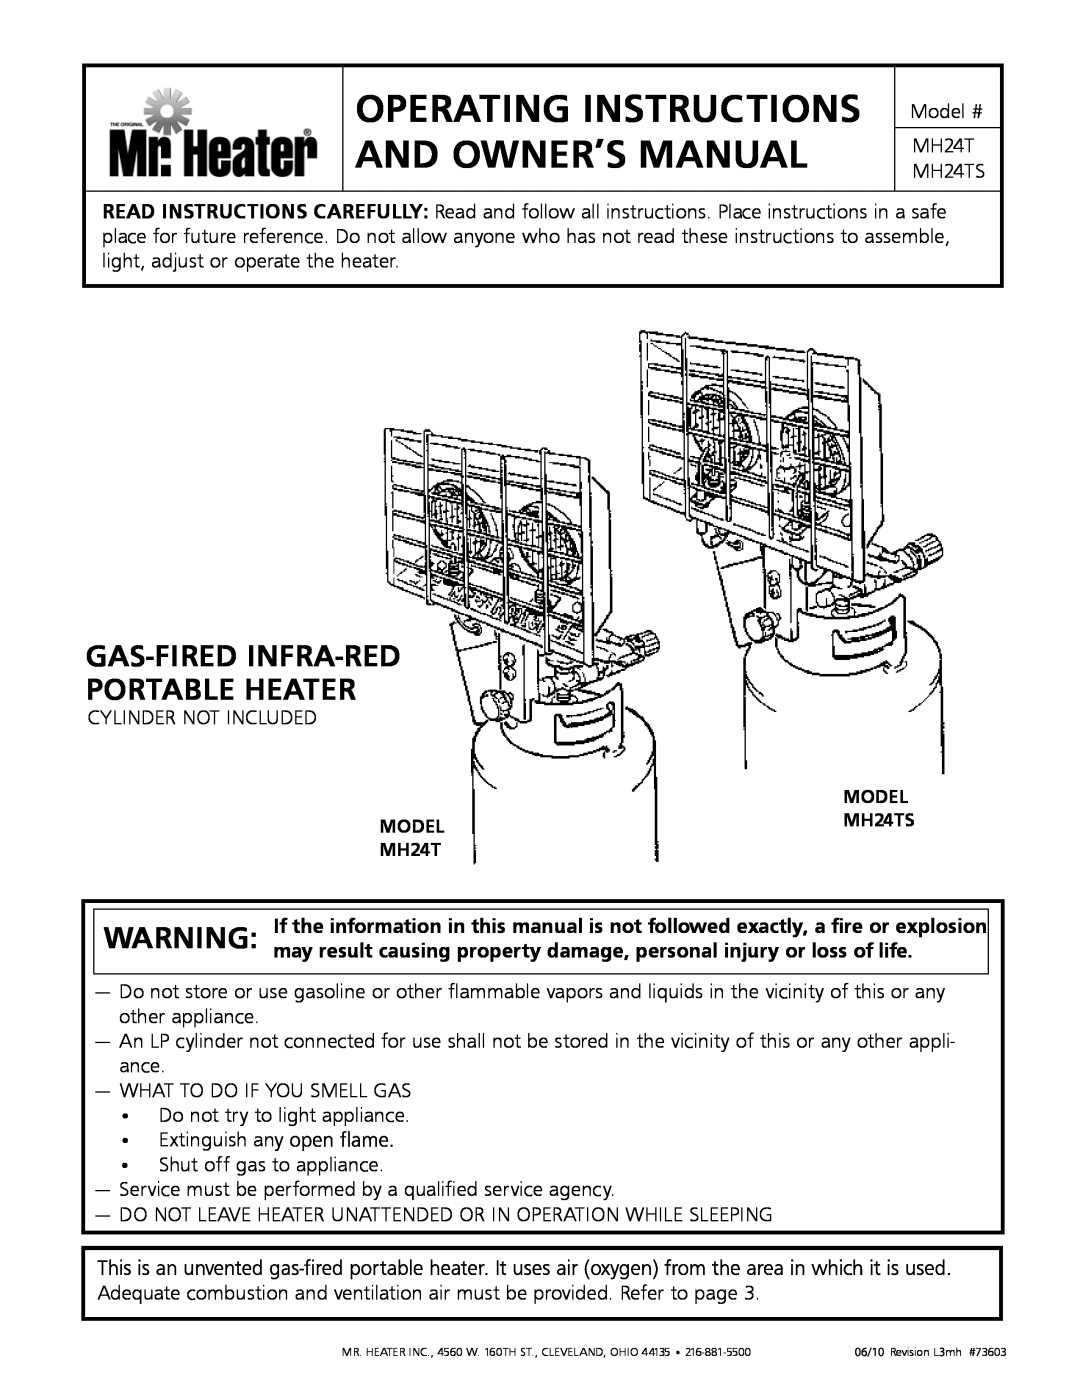 Mr. Heater MH24TS operating instructions Gas-Fired Infra-Red Portable Heater 